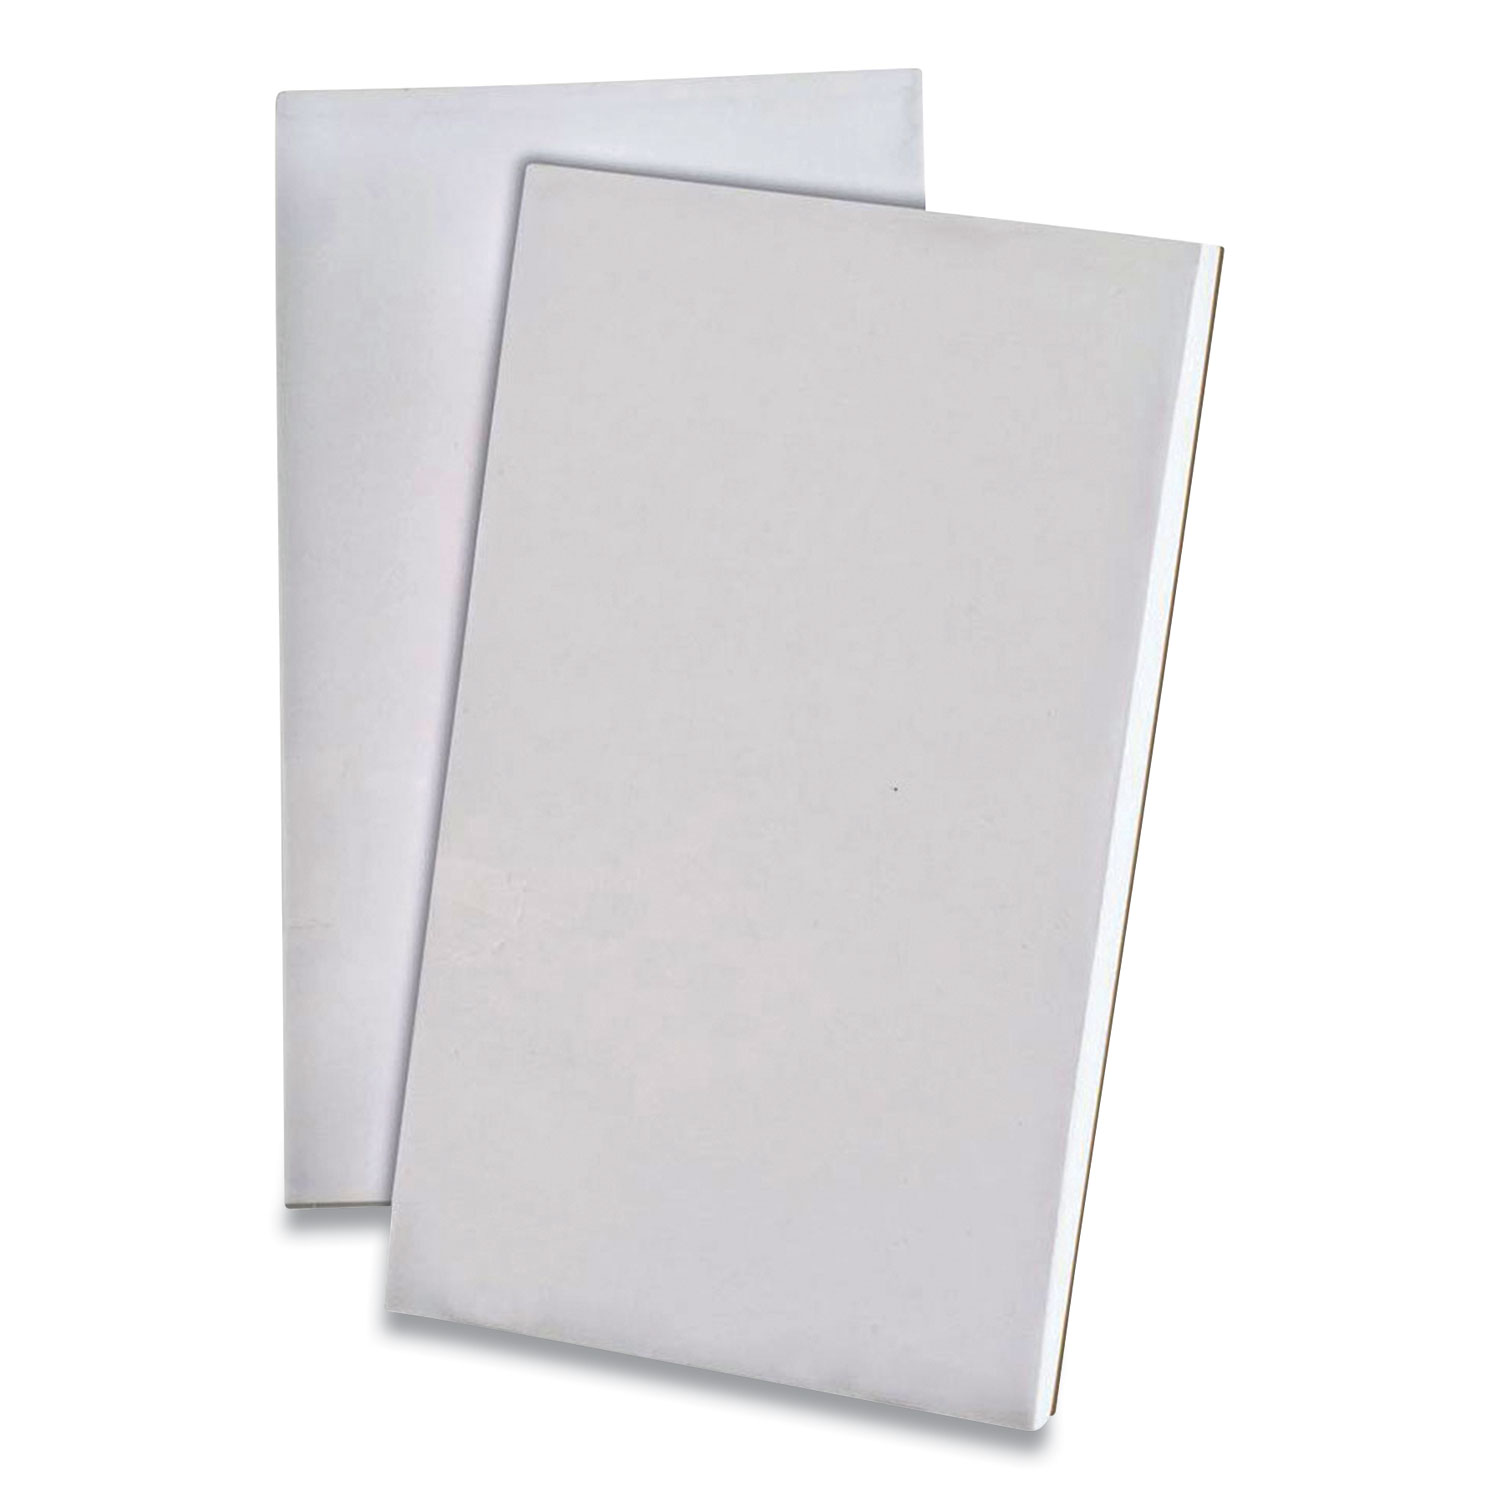  Ampad 21-430 Scratch Pads, Unruled, White Sheets, 3 x 5, 100 Sheets (AMP398004) 